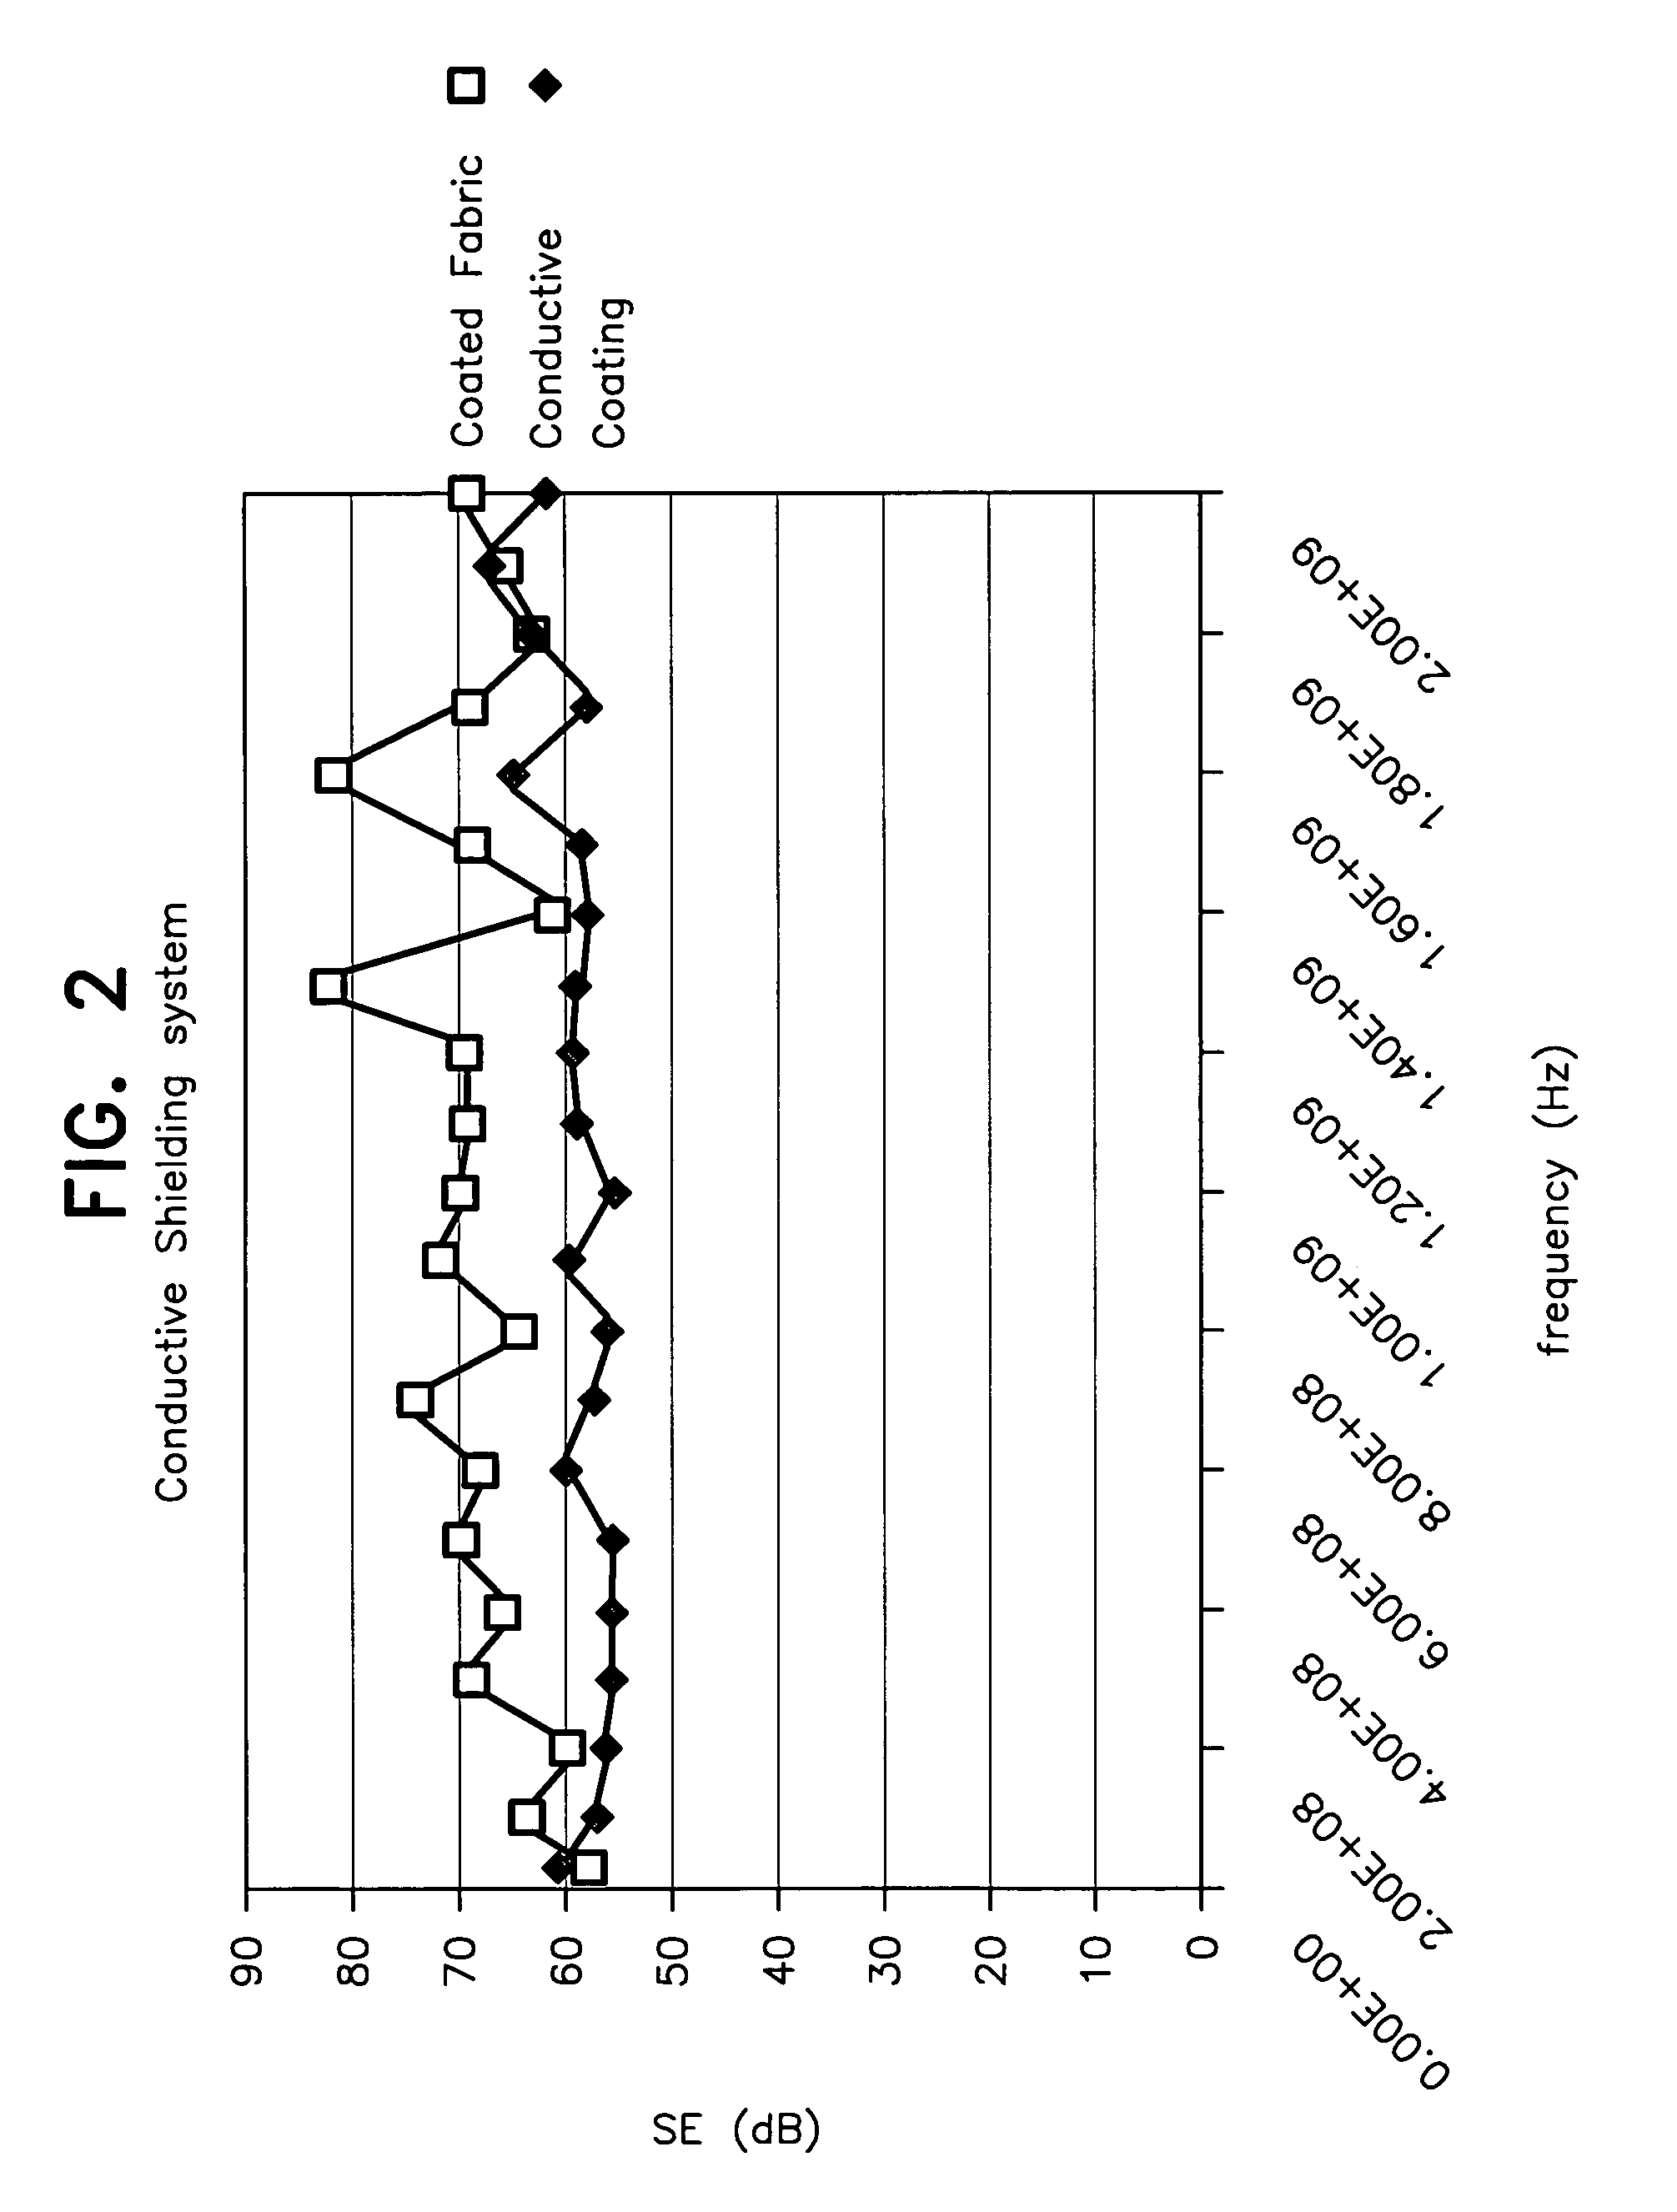 Electromagnetically shielded, flexible bomb suppression device